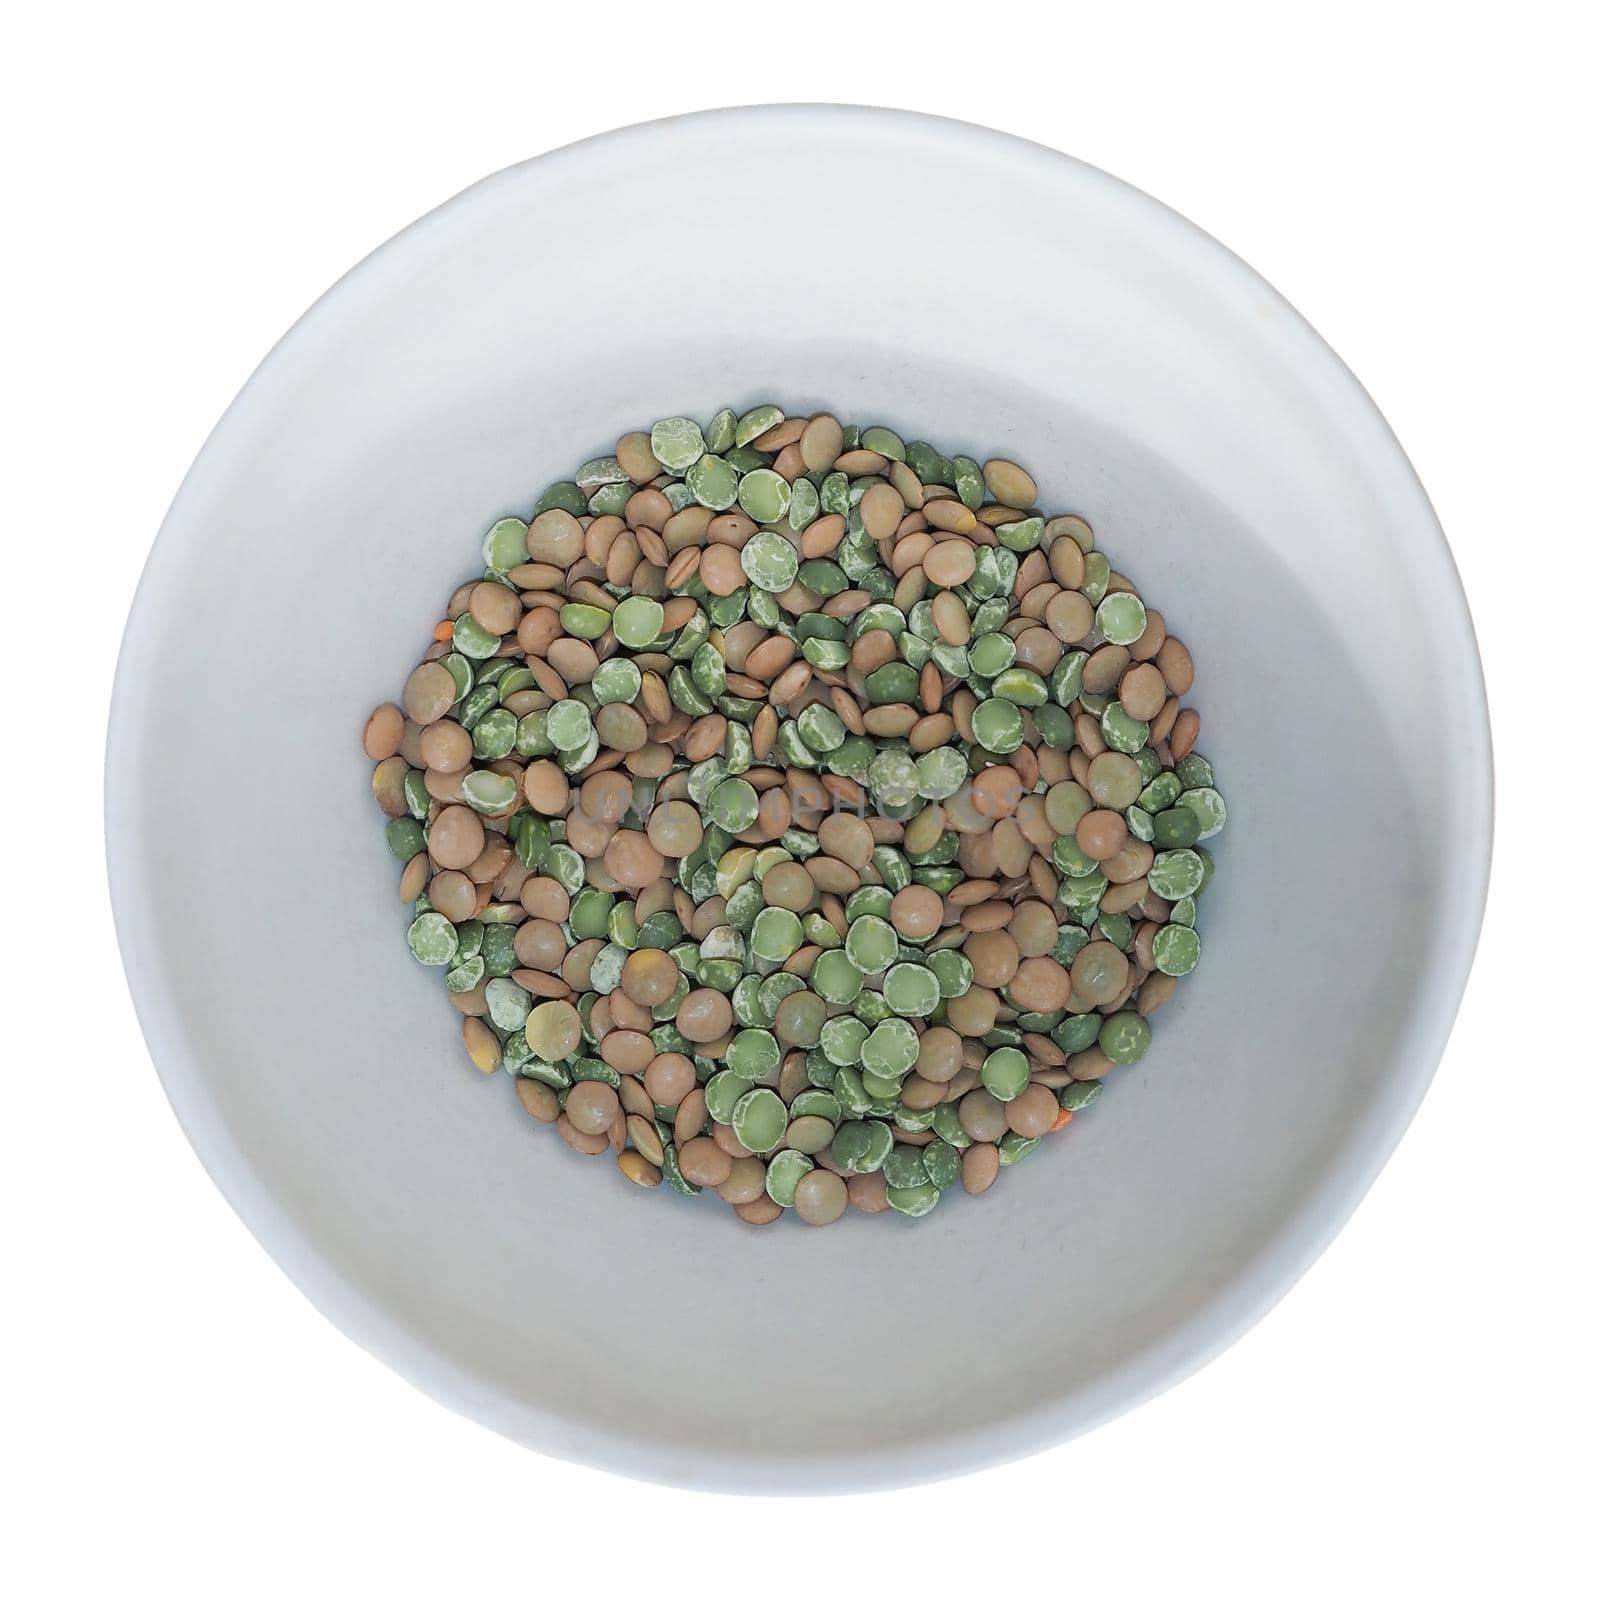 lentils and peas in a bowl isolated over white by claudiodivizia